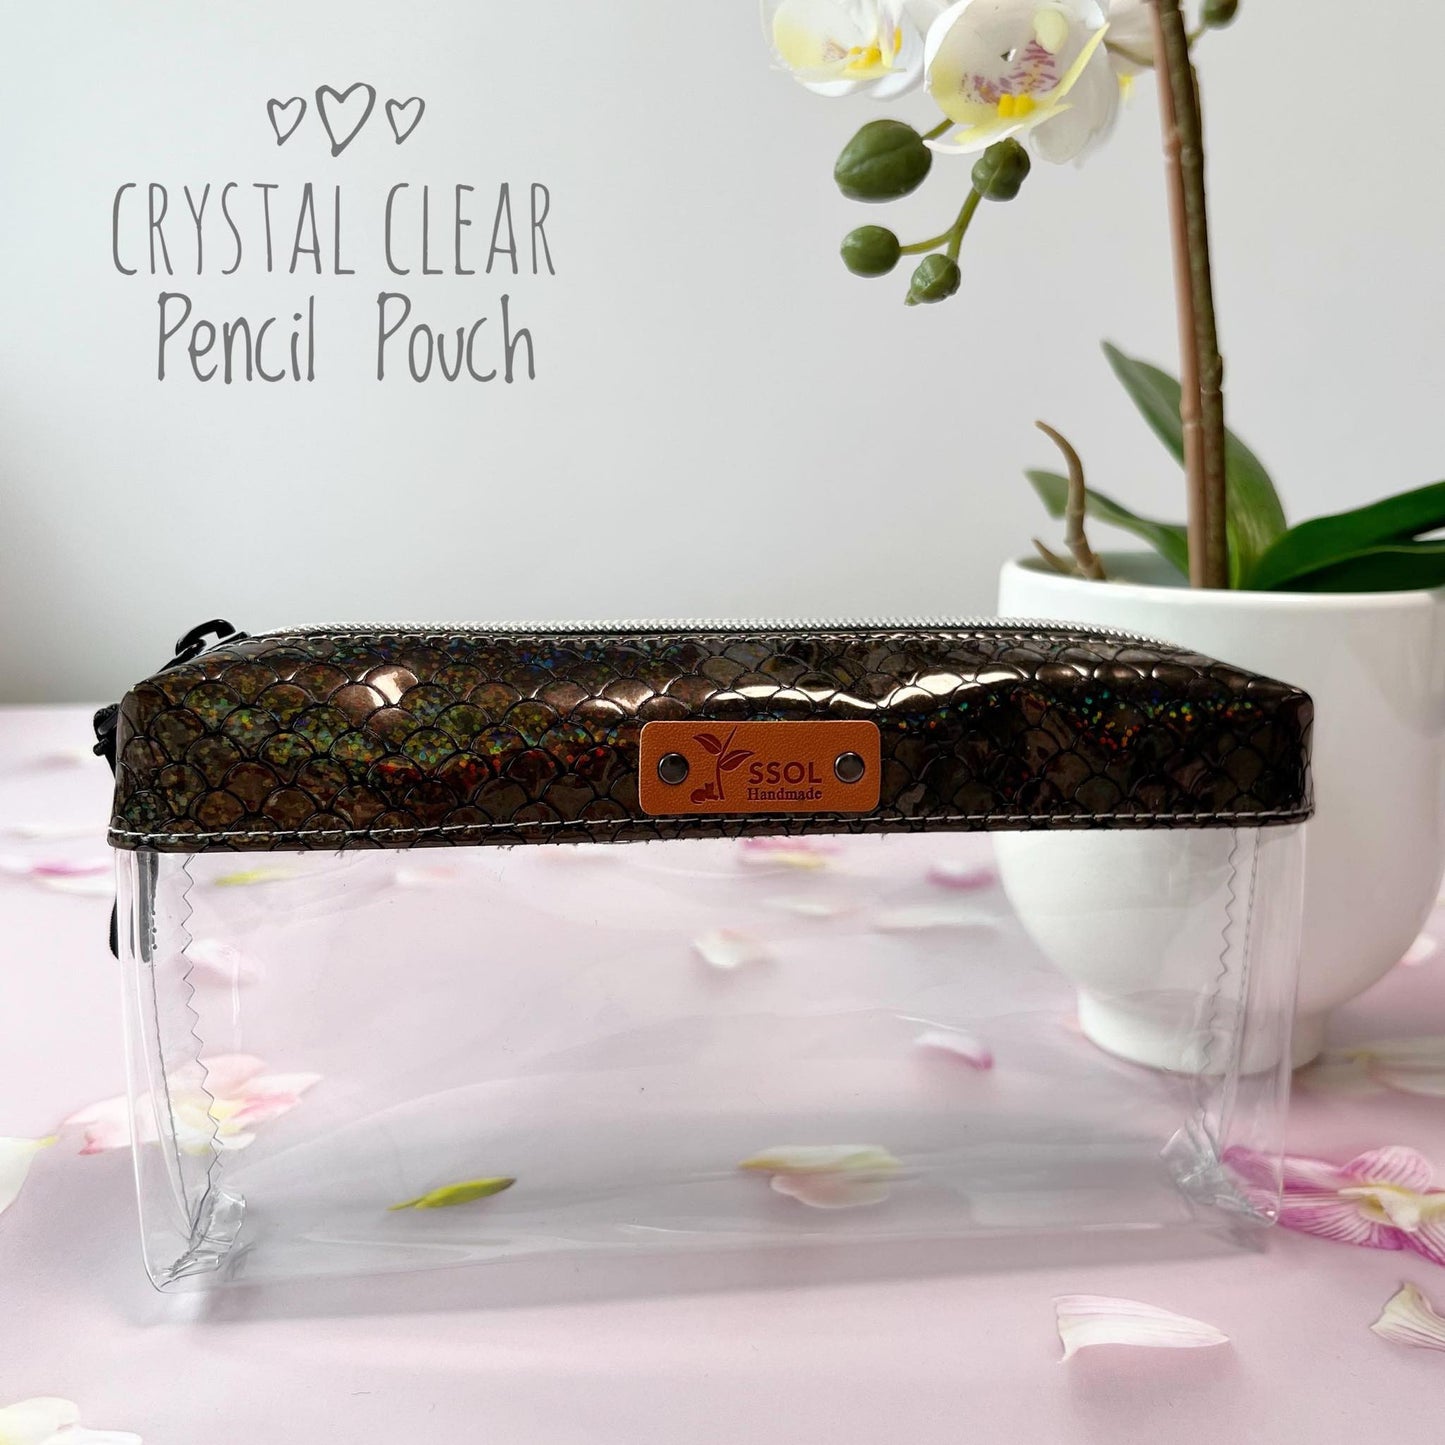 Crystal Clear Pencil Pouch - CCPP13